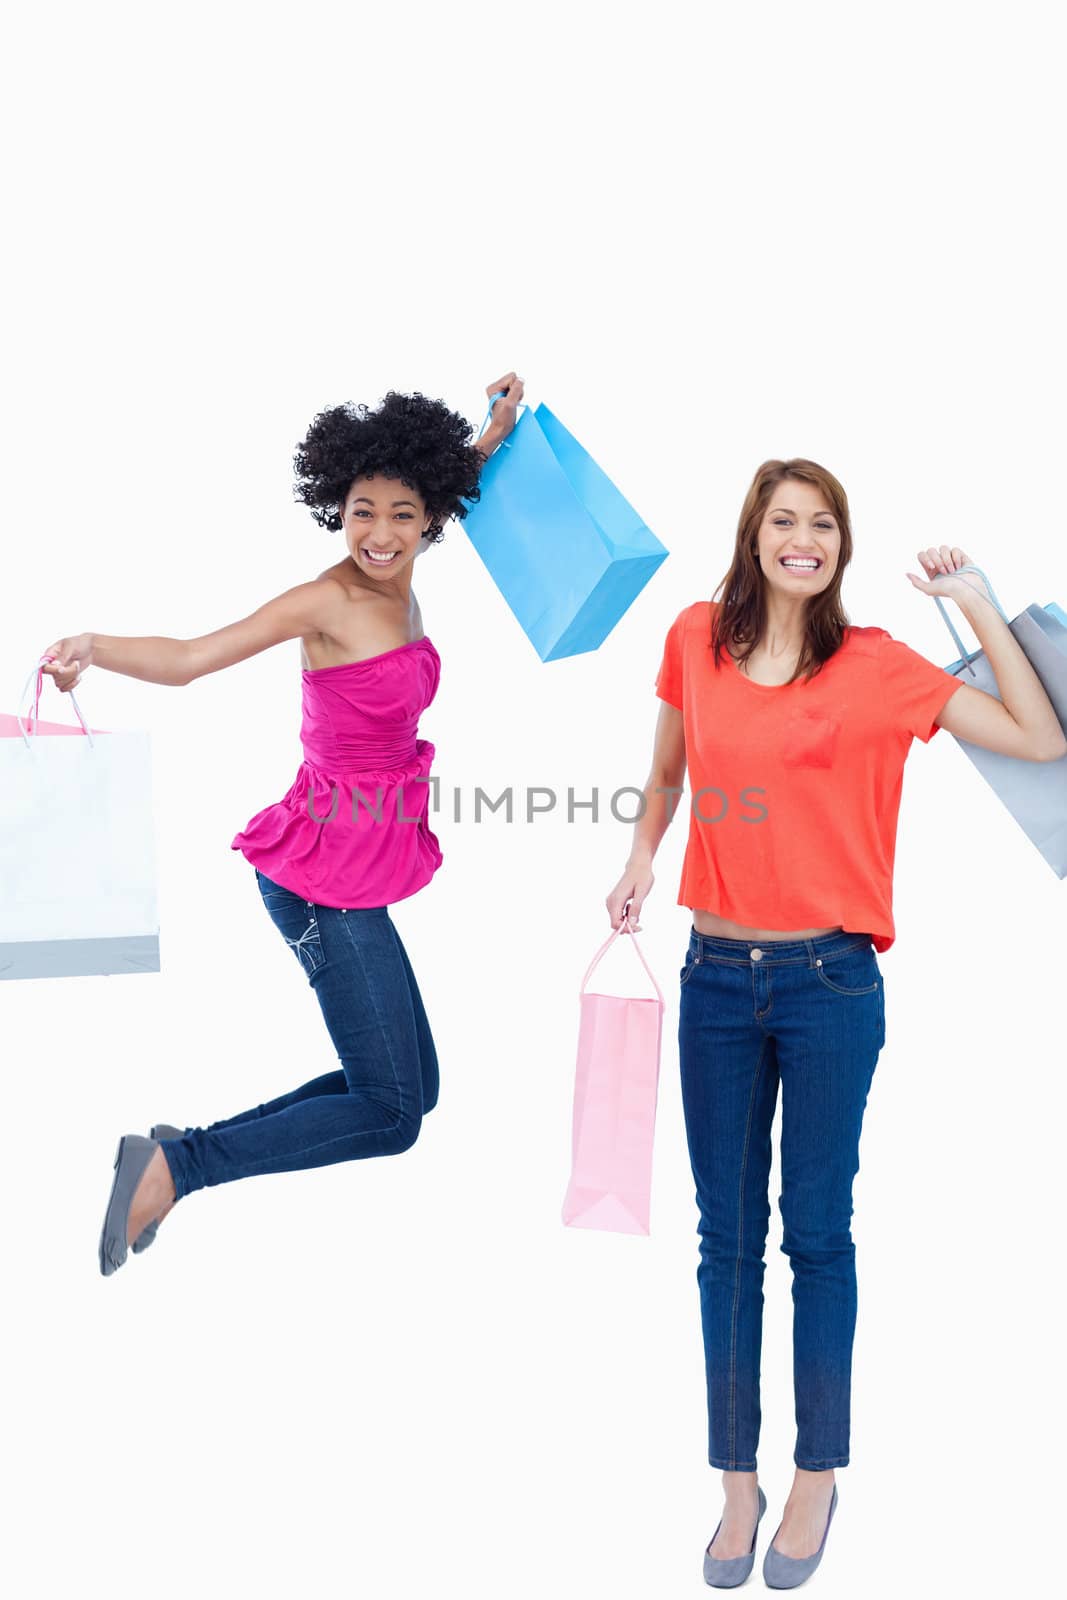 A teenage girl leaping while holding her shopping bags while her friend is smiling